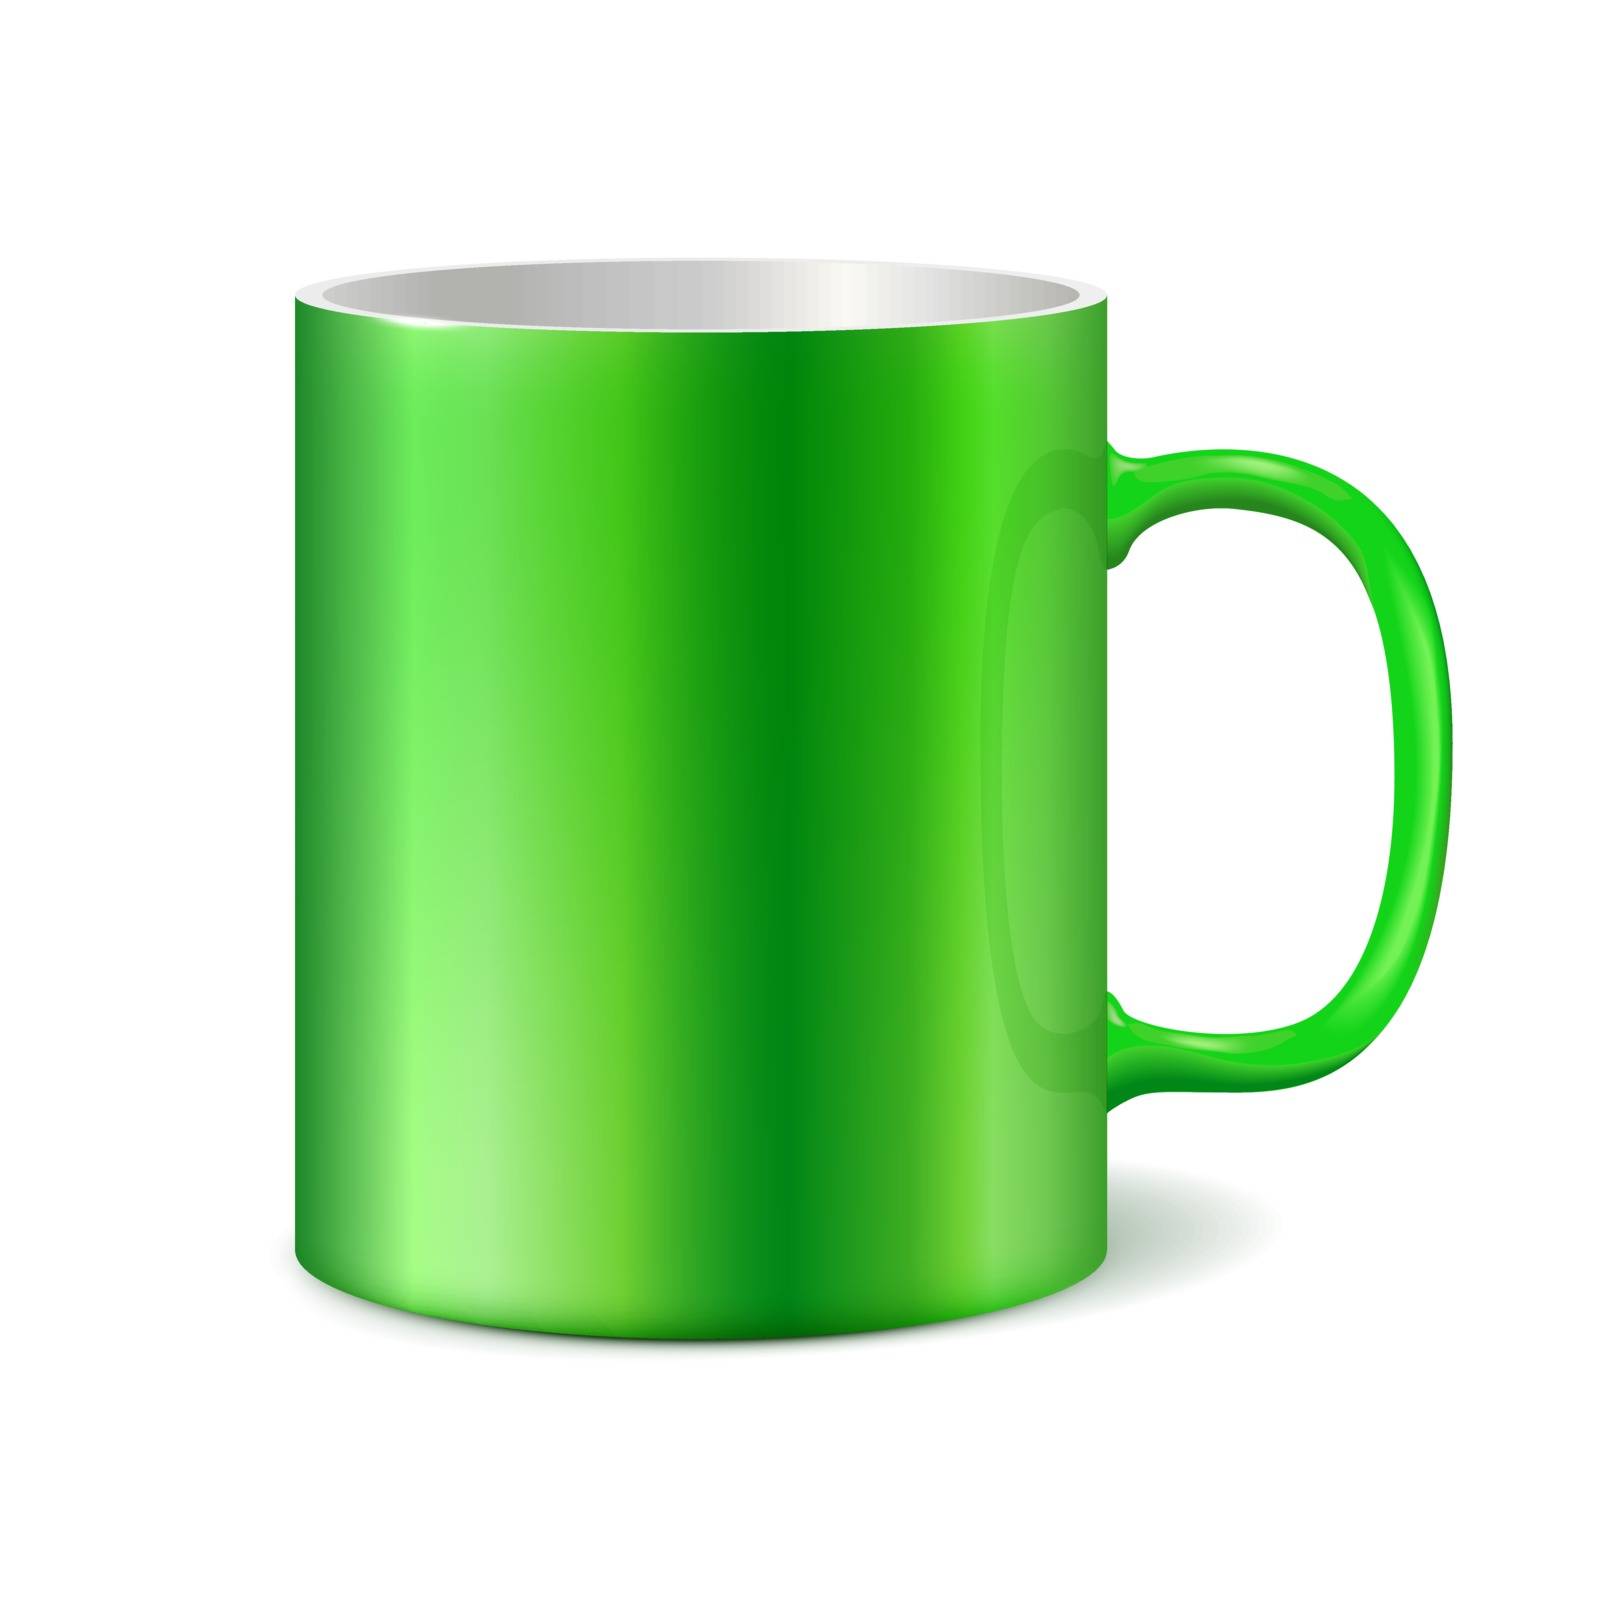 Green ceramic mug for printing corporate logo. Cup isolated on white background. Vector 3D illustration. Light color